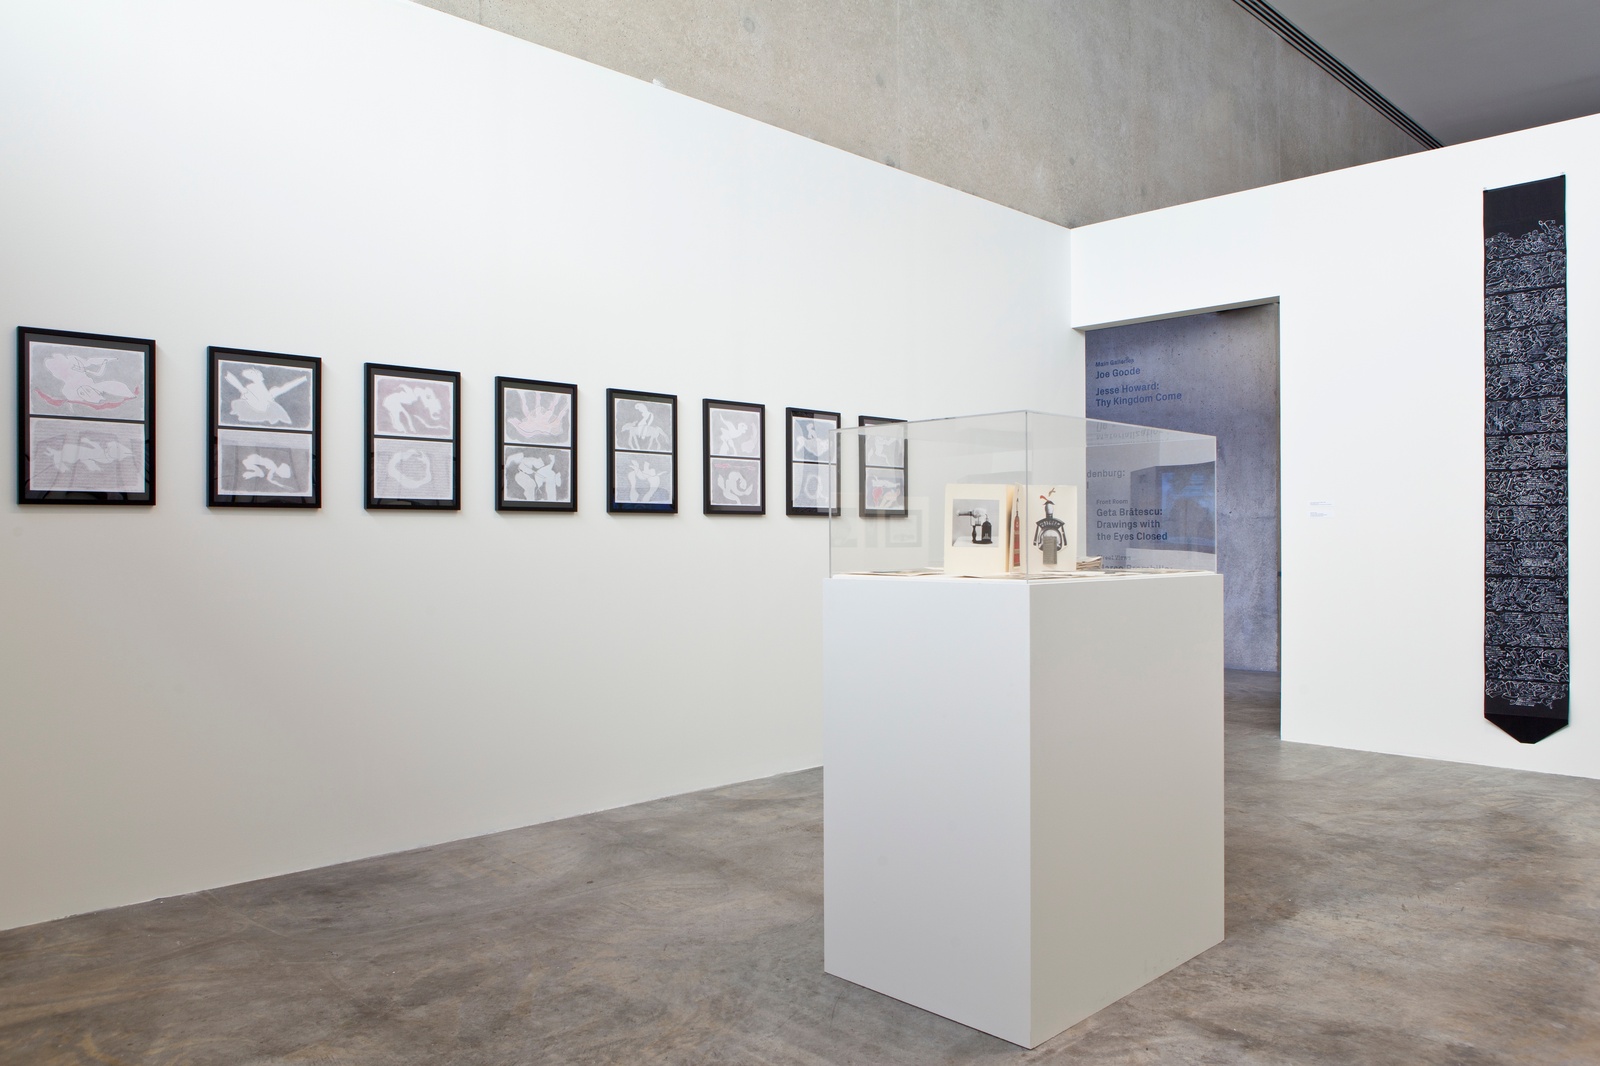 Geta Brătescu: Drawings with the Eyes Closed. March 6 – April 11, 2015